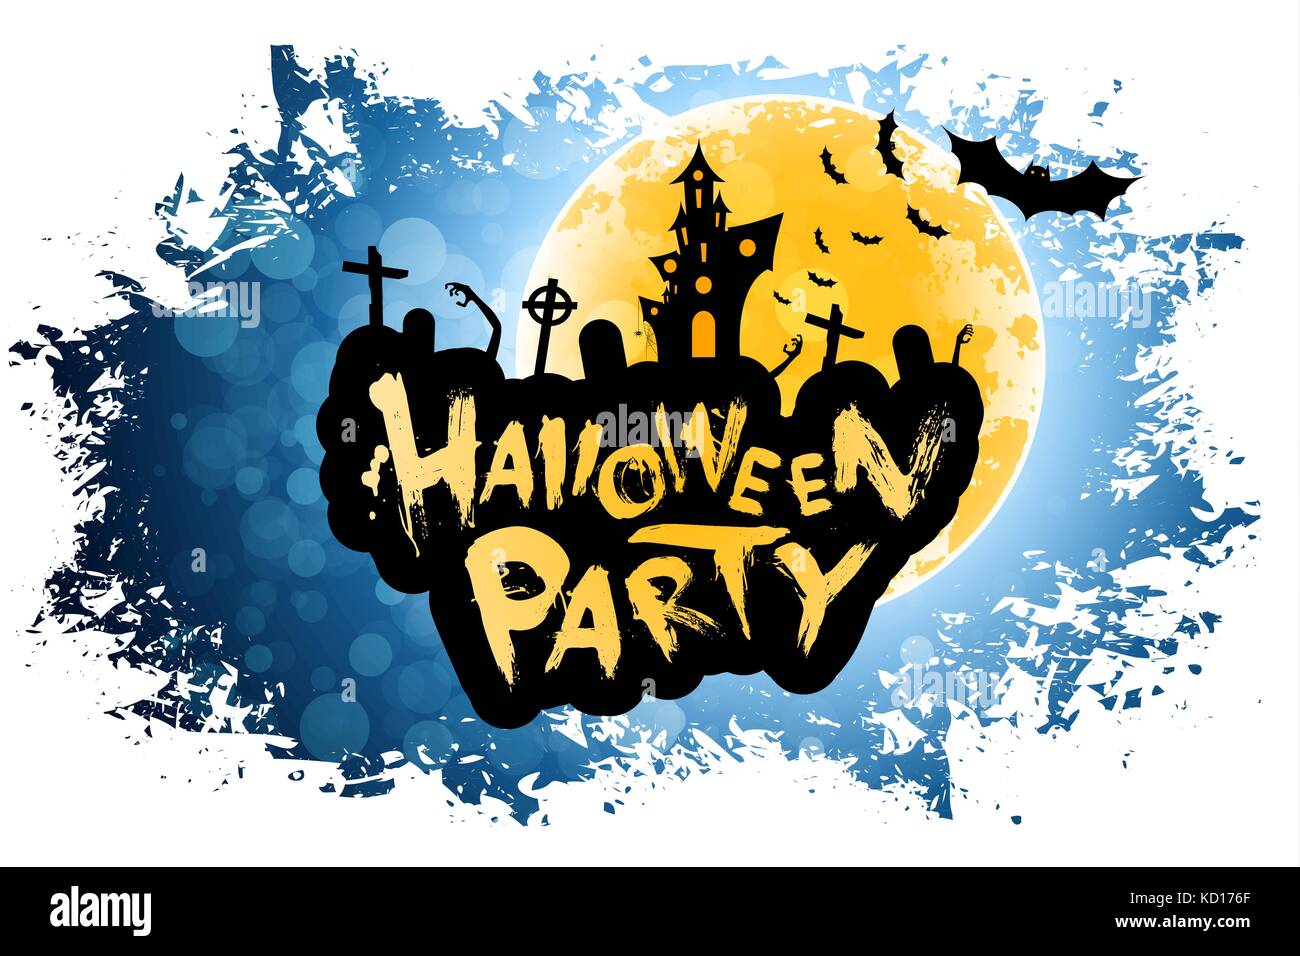 Grungy Halloween Party Poster Stock Vector